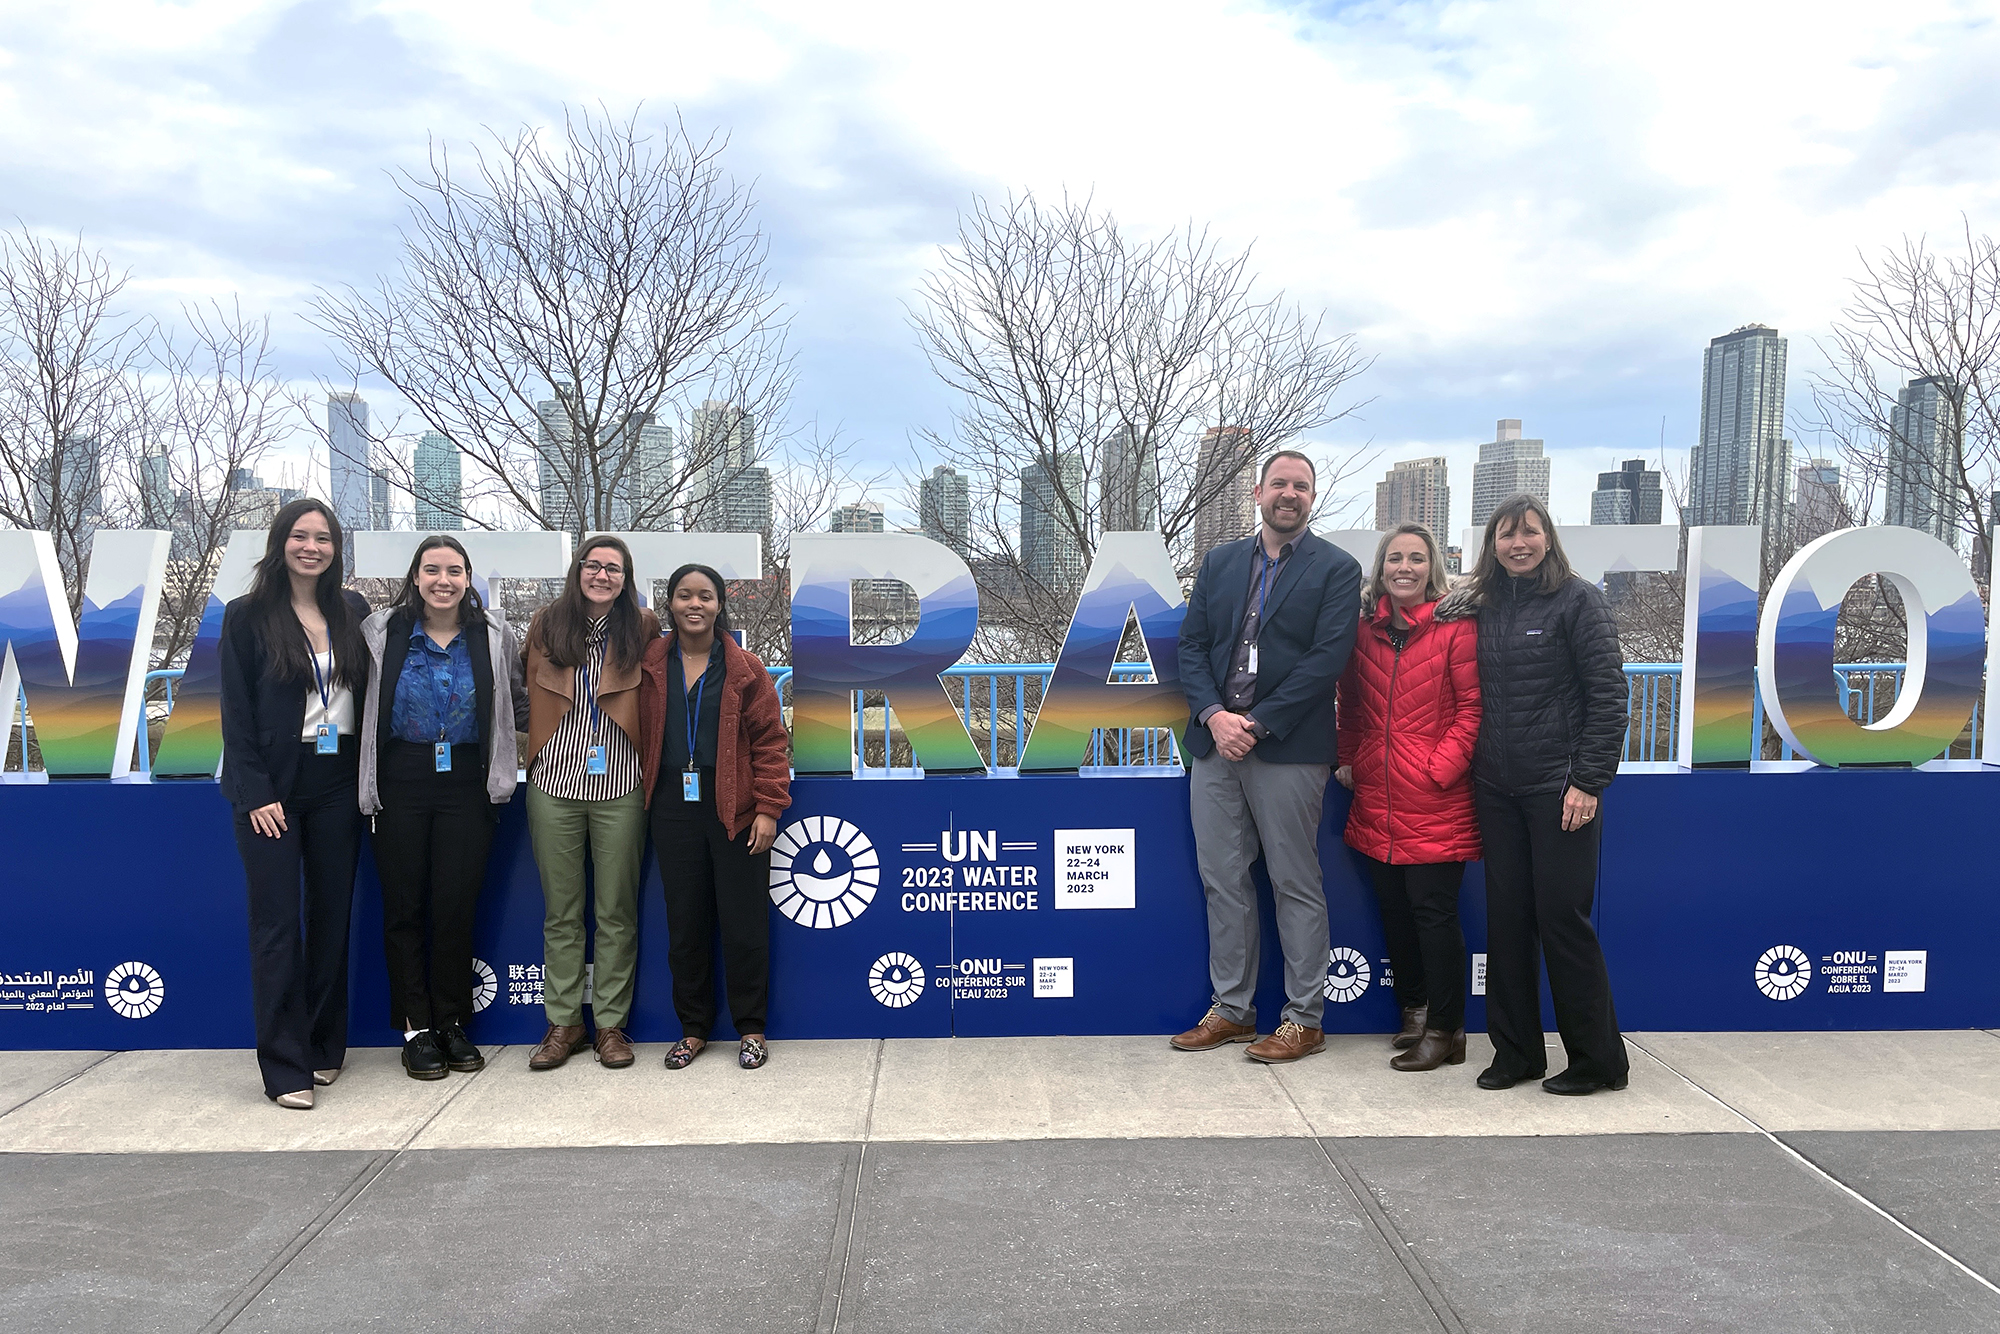 Seven people stand in front of banner reader UN 2023 Water Conference with New York skyline in background